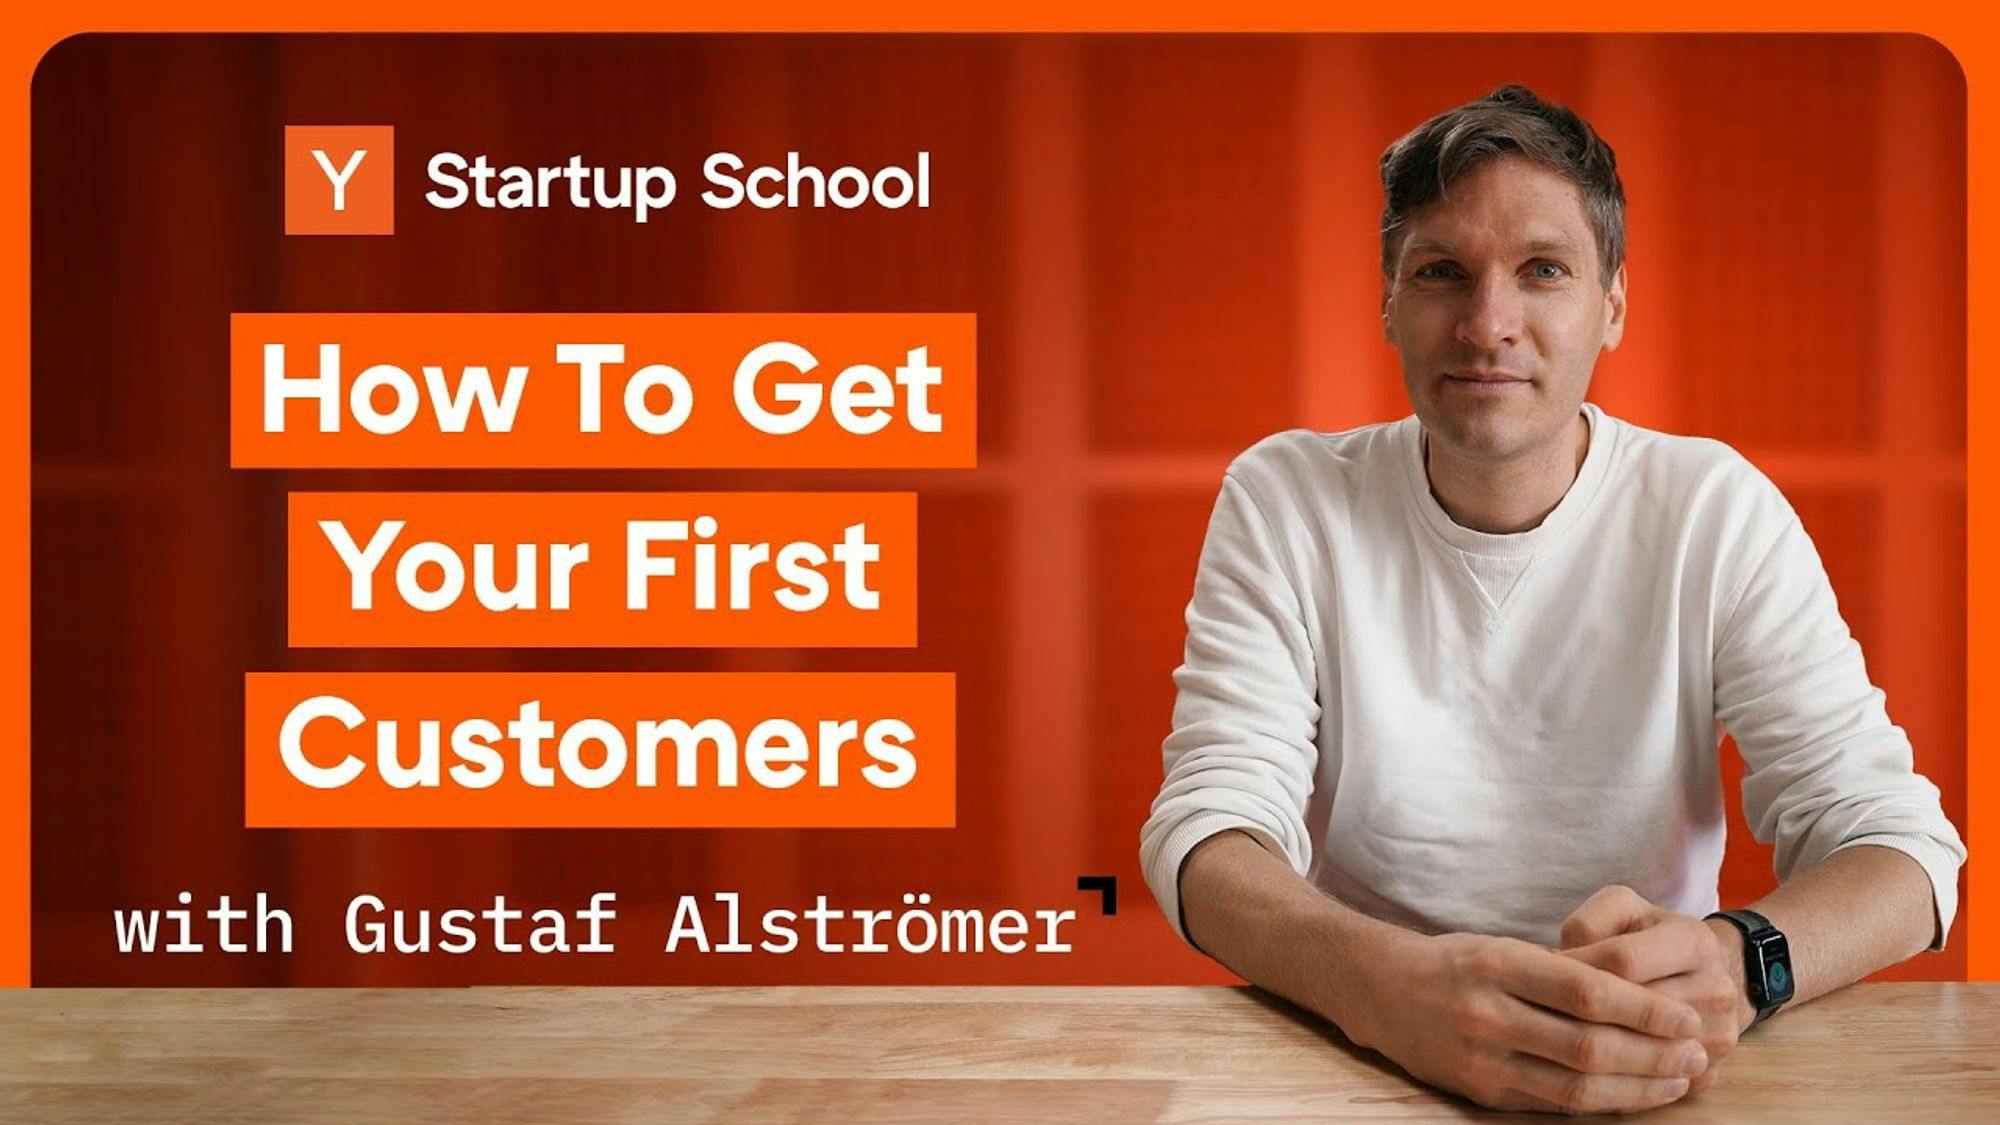 How to Get Your First Customers | Startup School